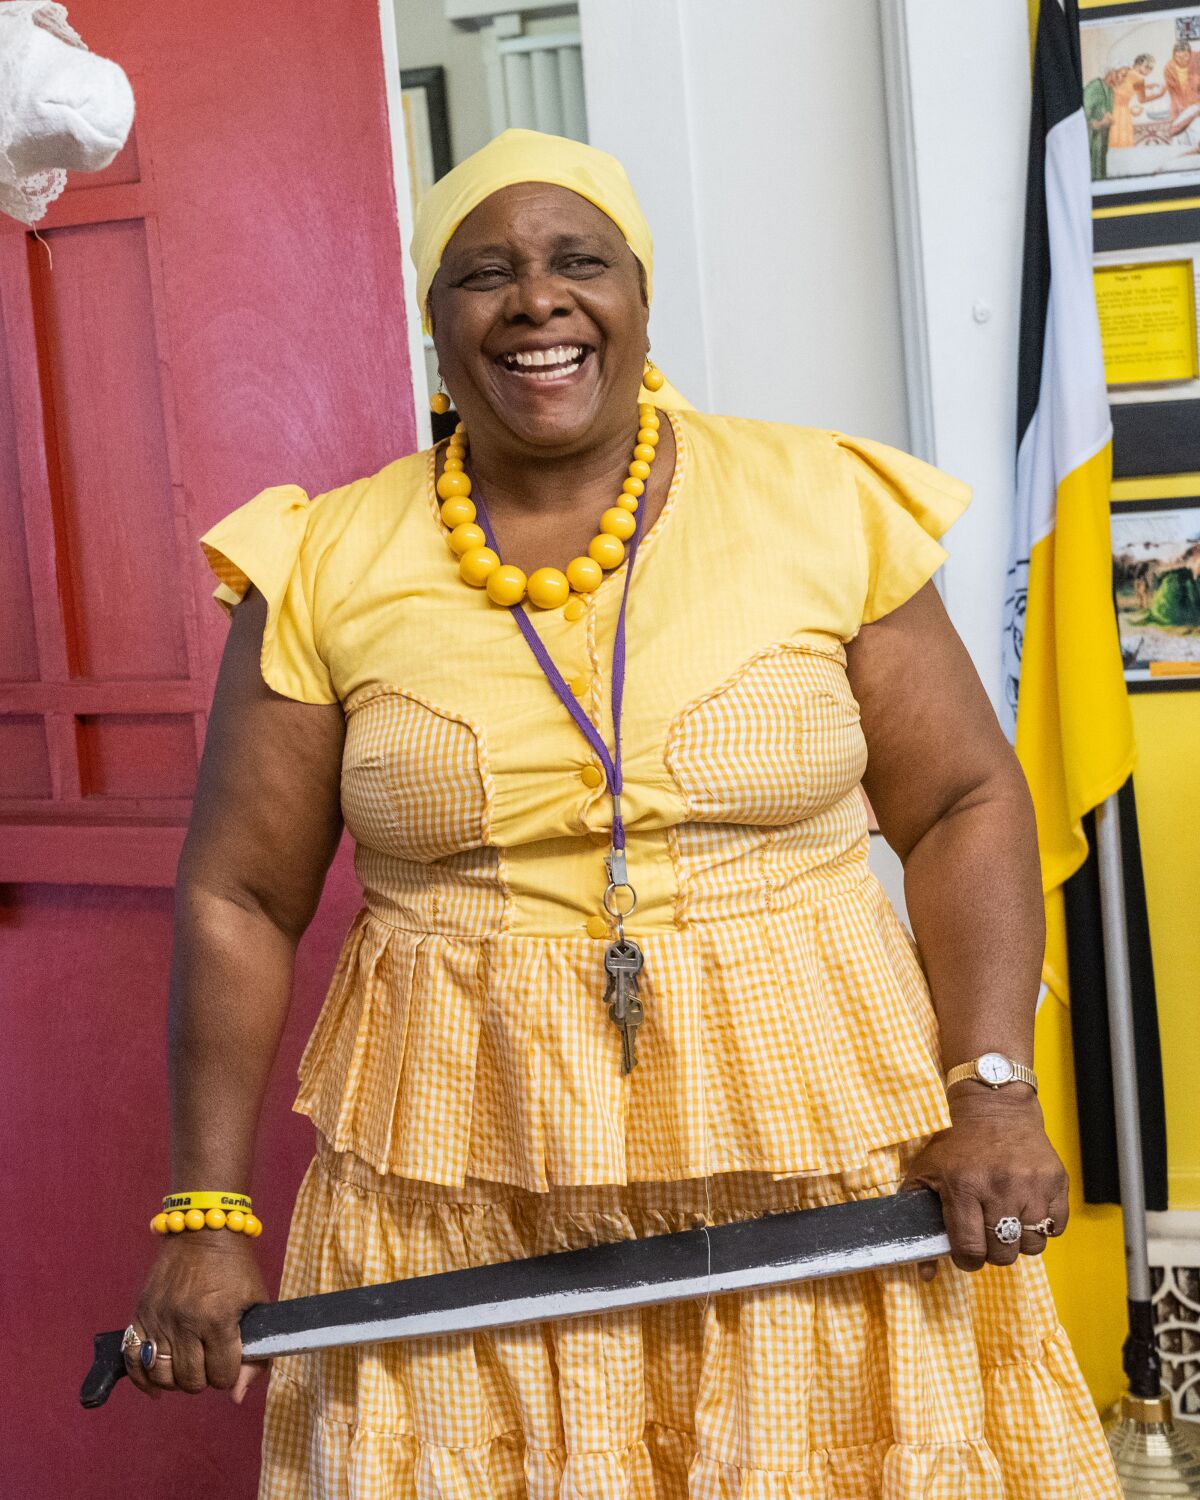 'I've got to find out who I am:' How the Garifuna Museum is reclaiming culture and identity